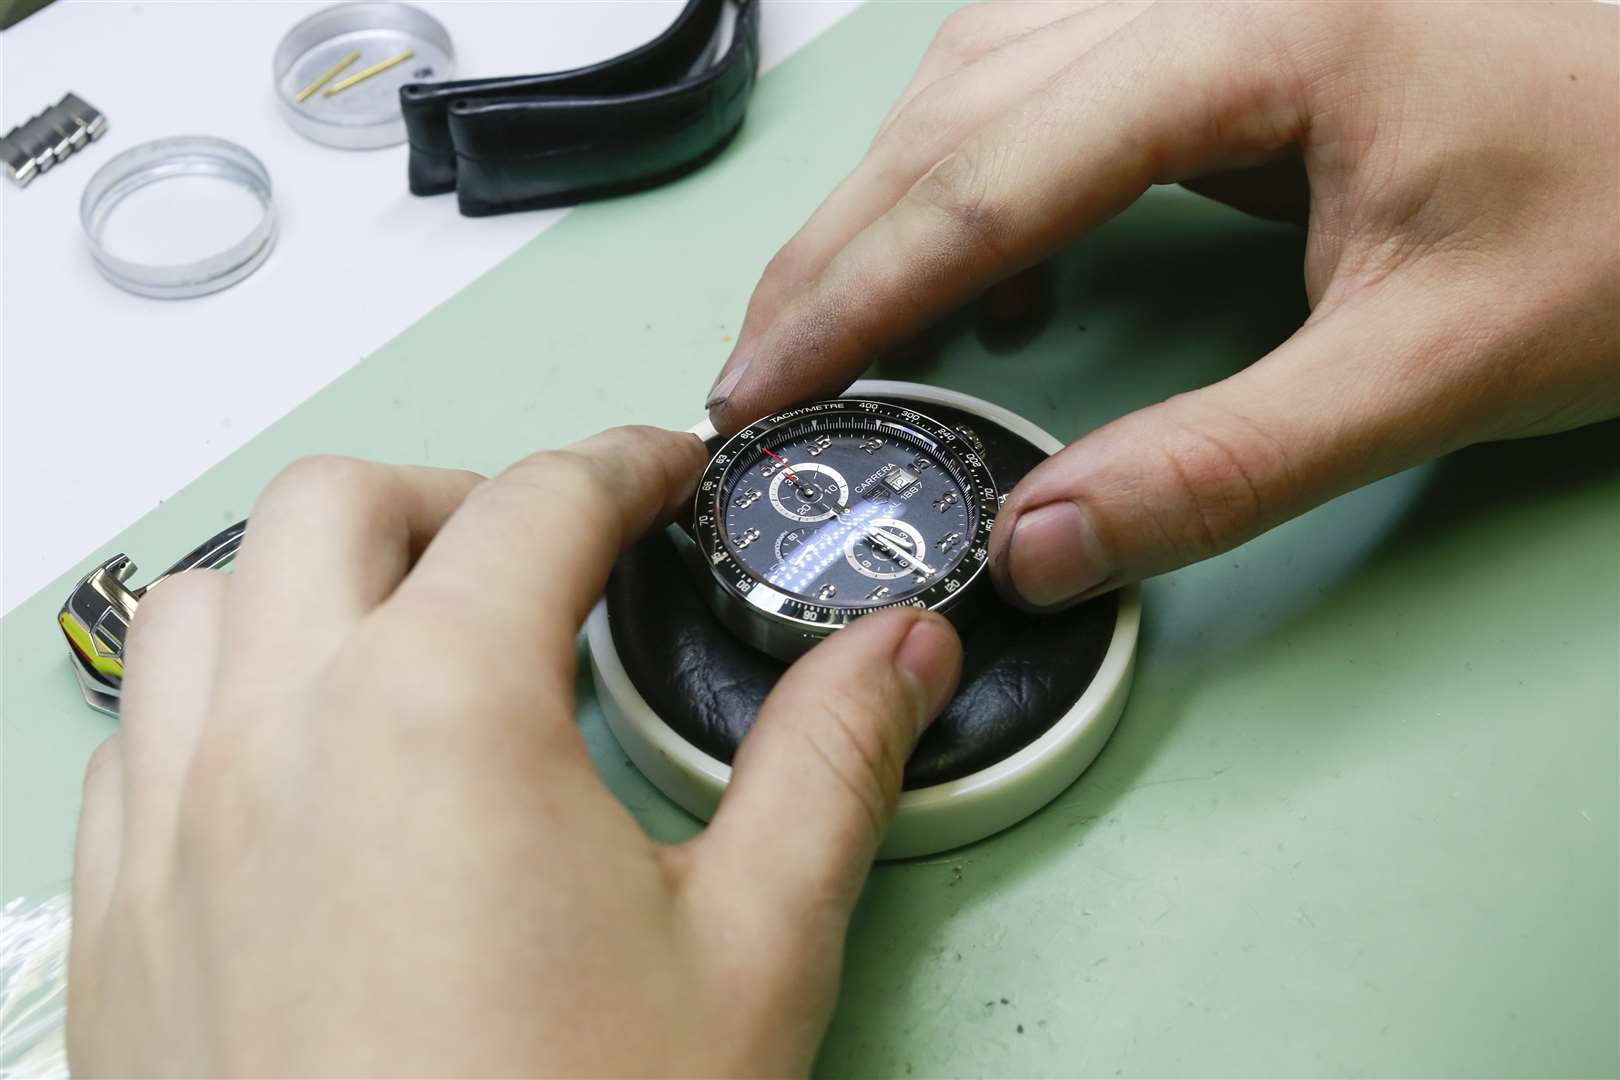 Watchfinder sells, services and repairs luxury second-hand watches